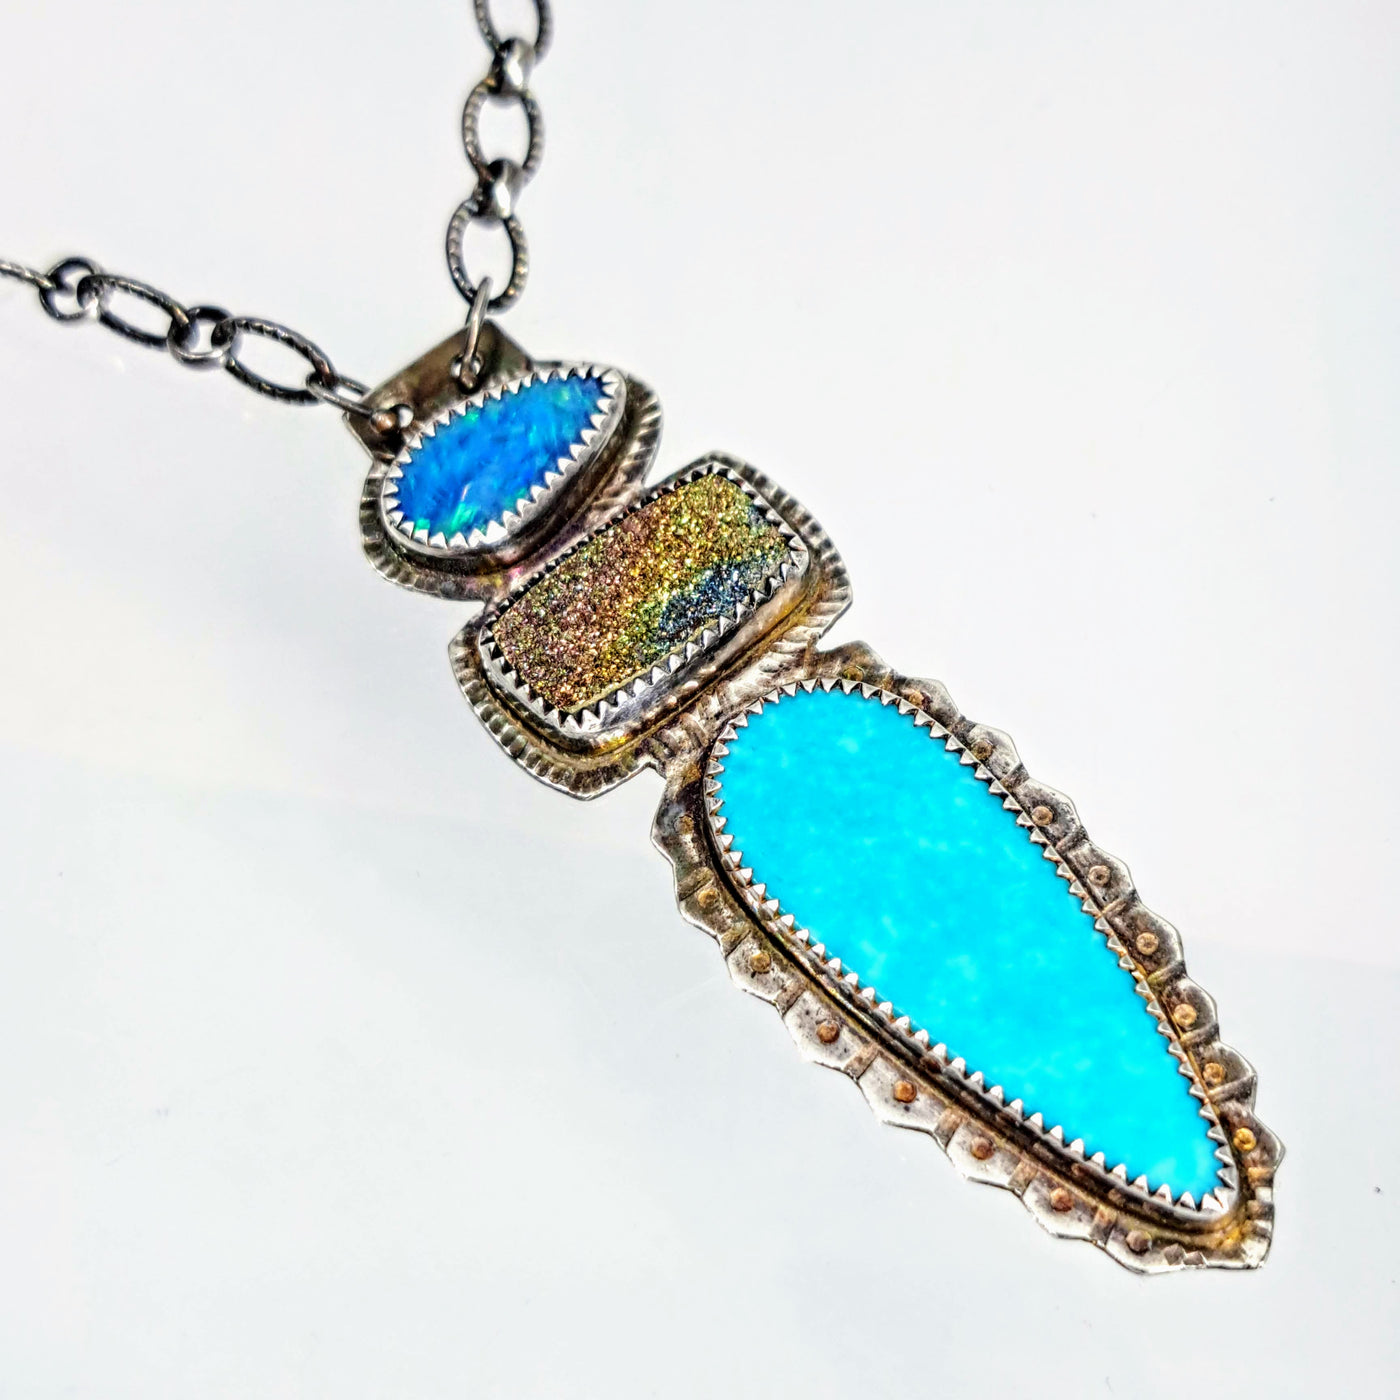 "Earth Magic" Adj. Up to 22" Necklace - Blue Opal, Titanium Druzy, Gem Silica Turquoise, Patinaed Sterling